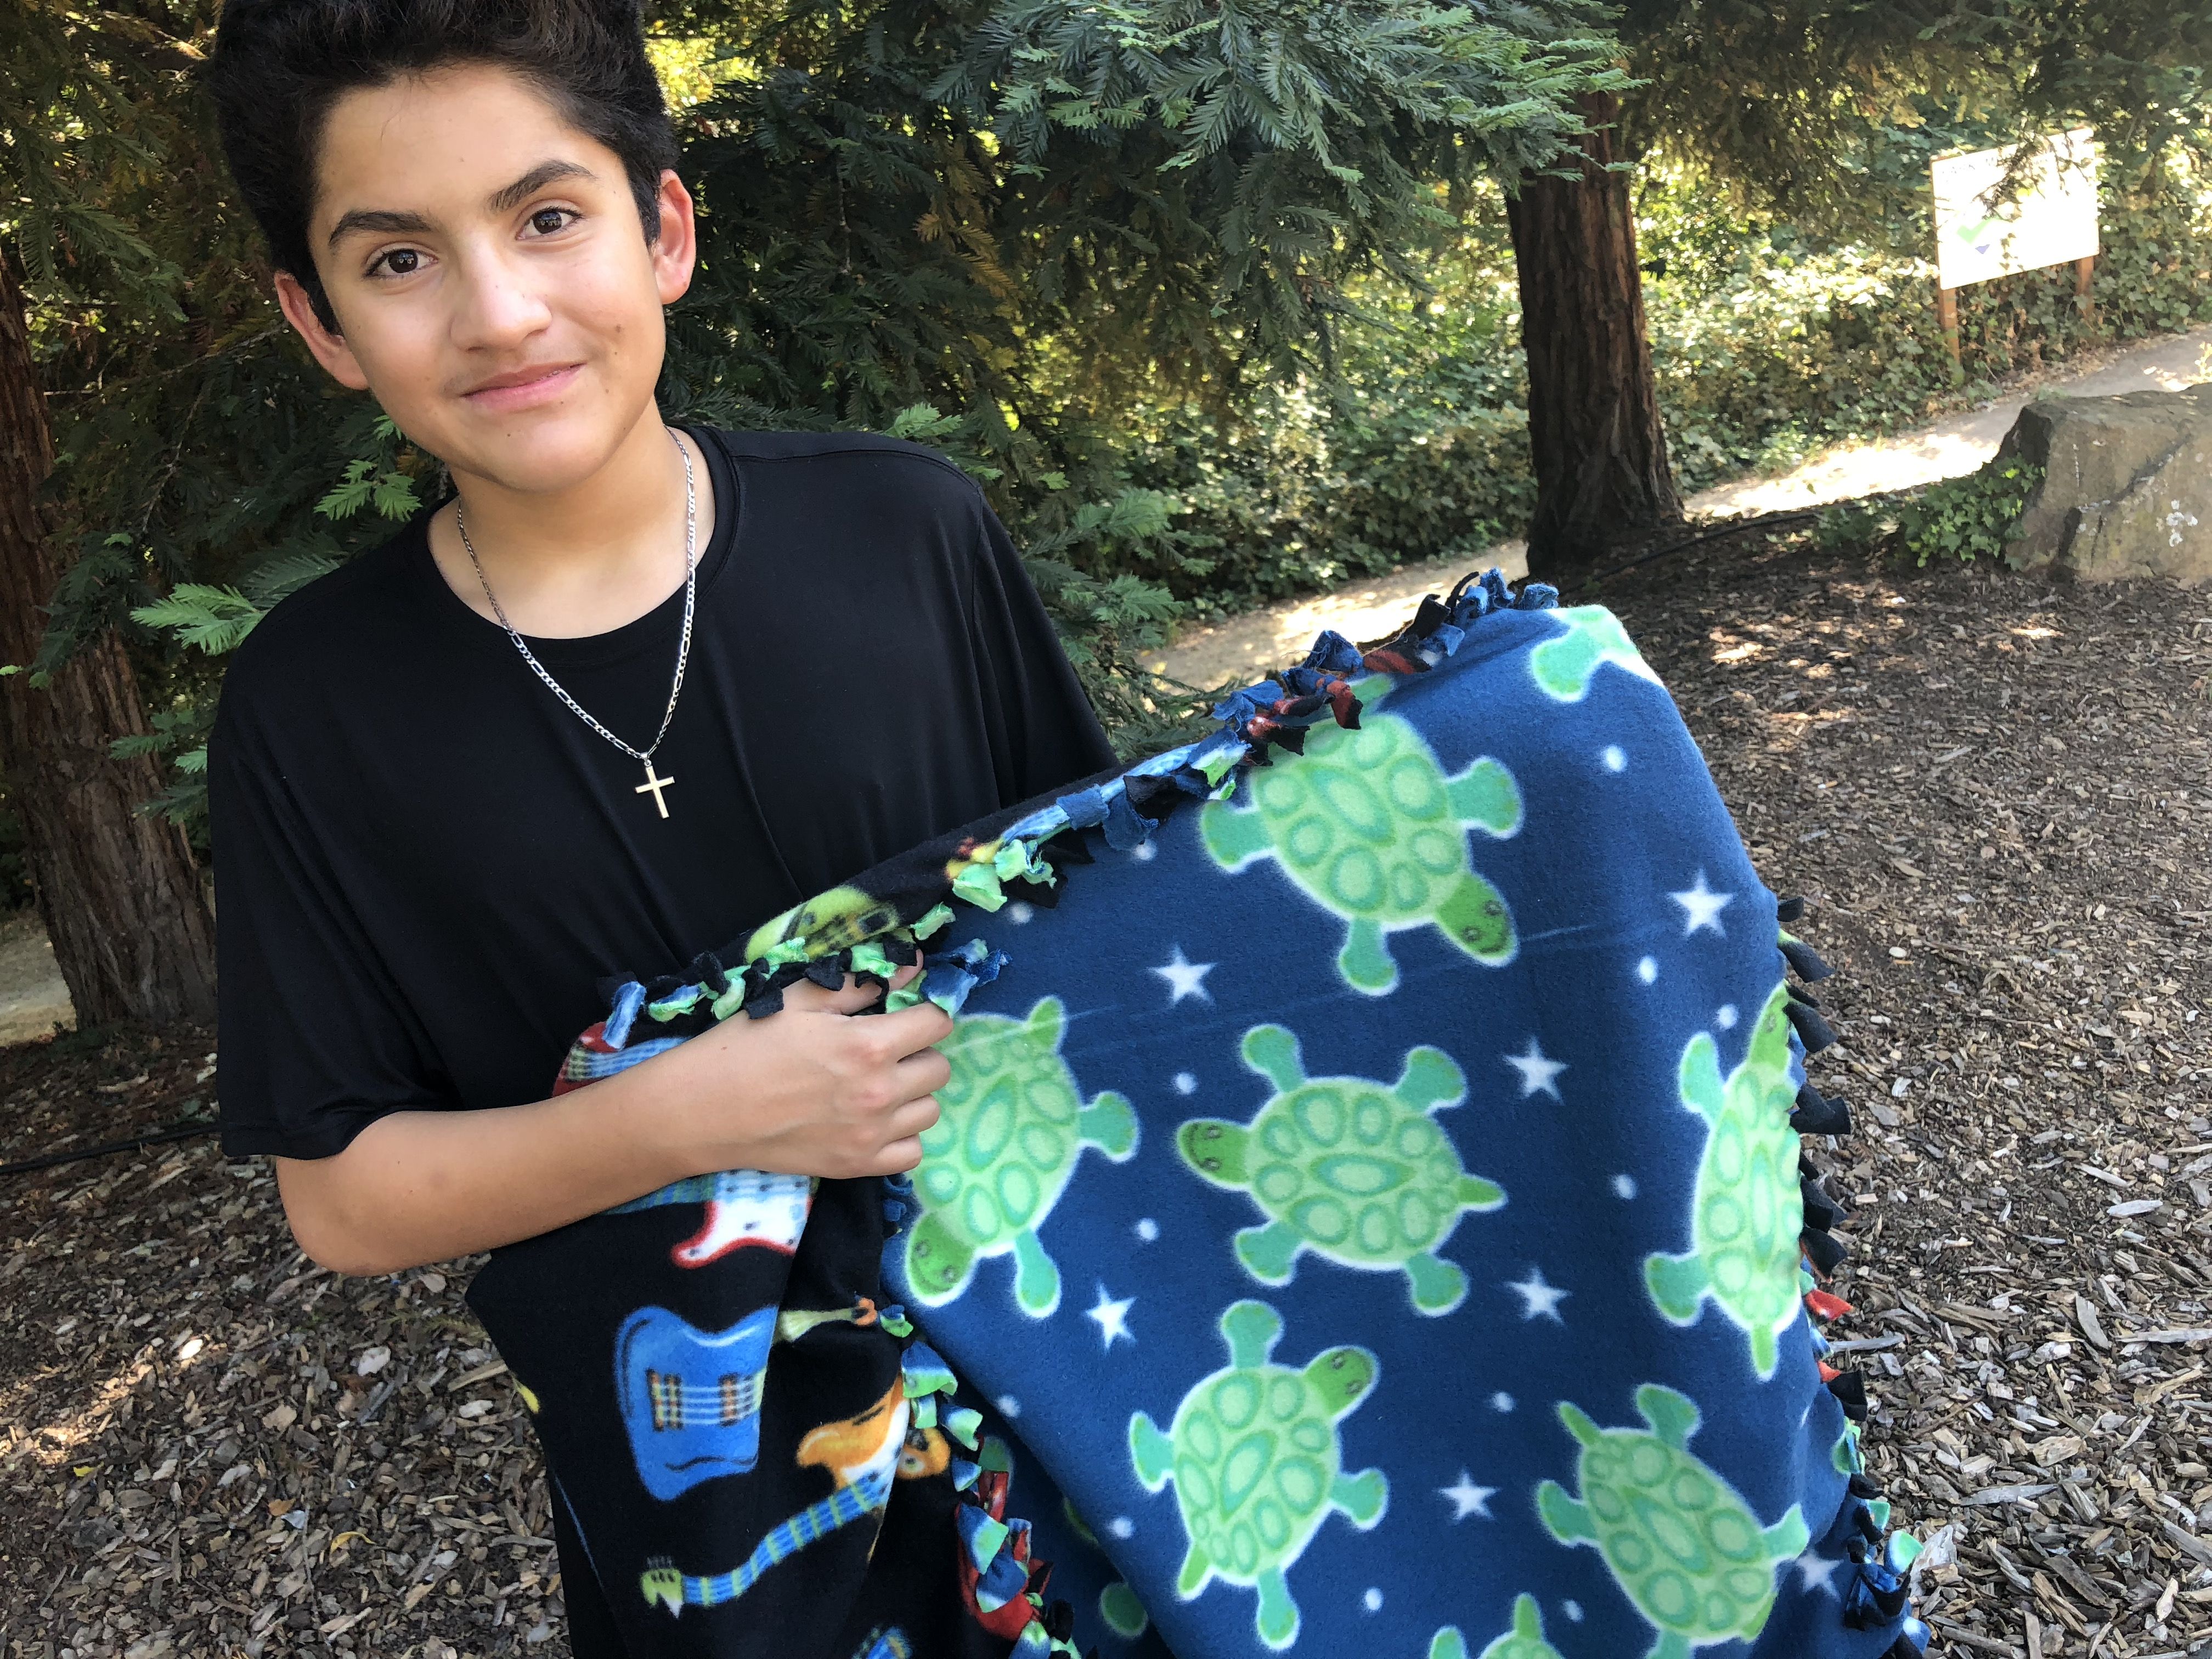 Carlos shows off a blanket he made with his mom. He chose the fabric with the guitars to reflect his love of music. His mom picked the sea turtles. Image by Jaime Joyce for TIME Edge. California, 2018.